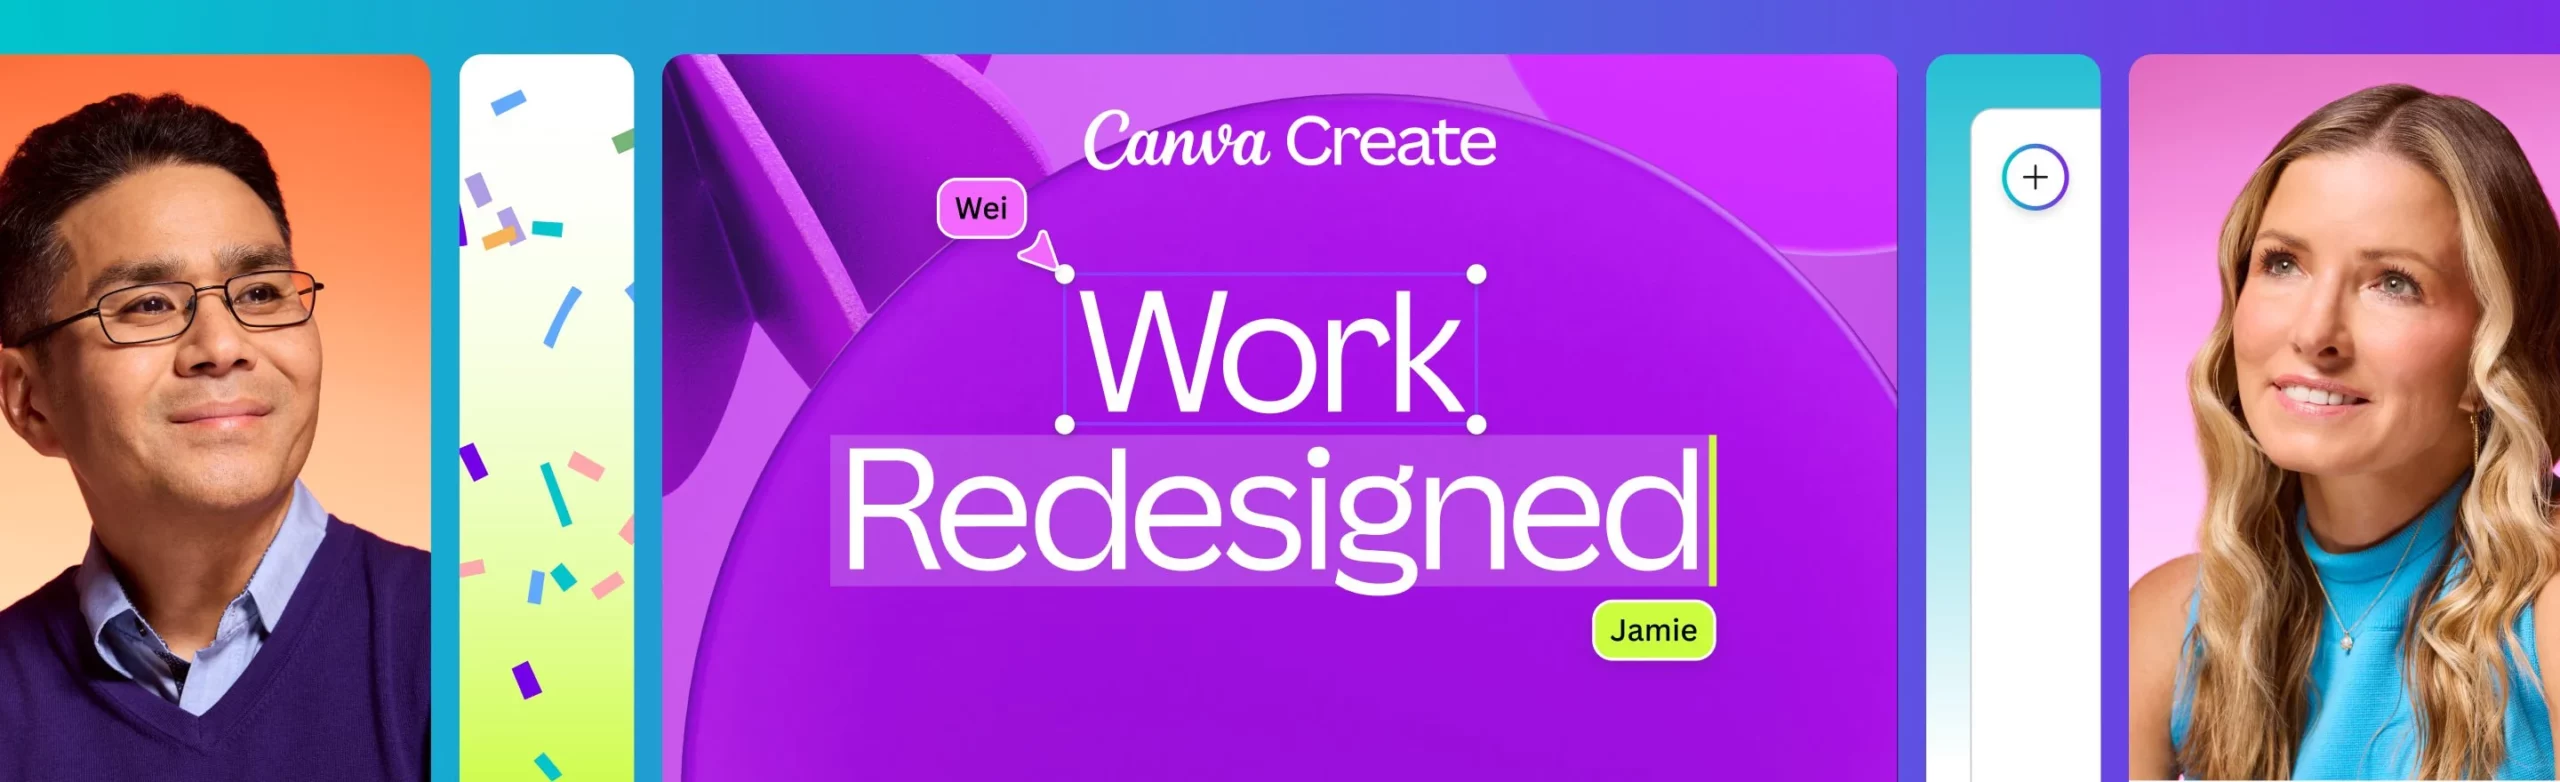 Canva Create 2024 event banner featuring the theme "Work Redesigned" with images of two individuals on colorful backgrounds.